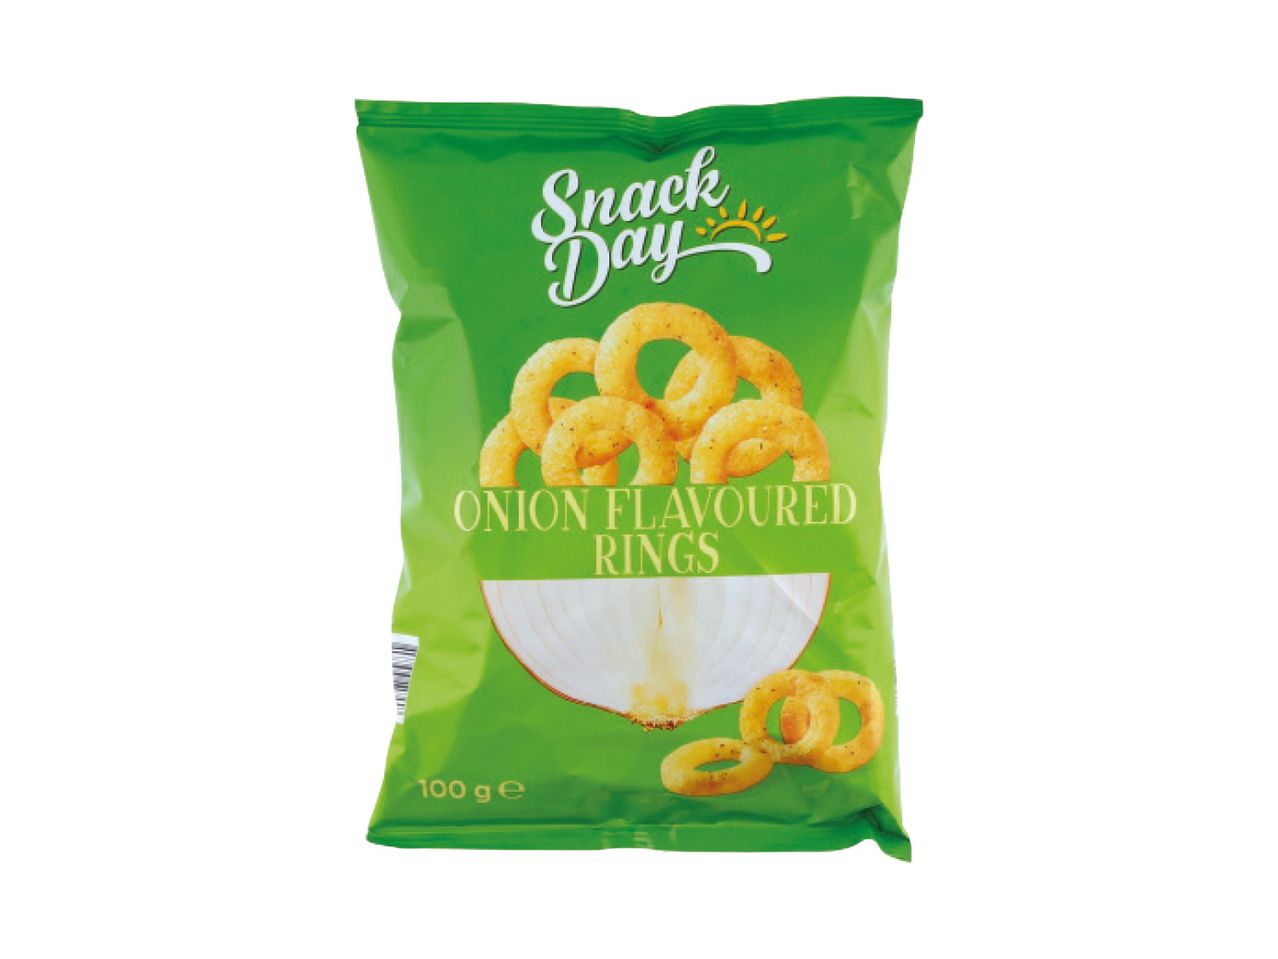 Go to full screen view: Onion Flavoured Rings - Image 1